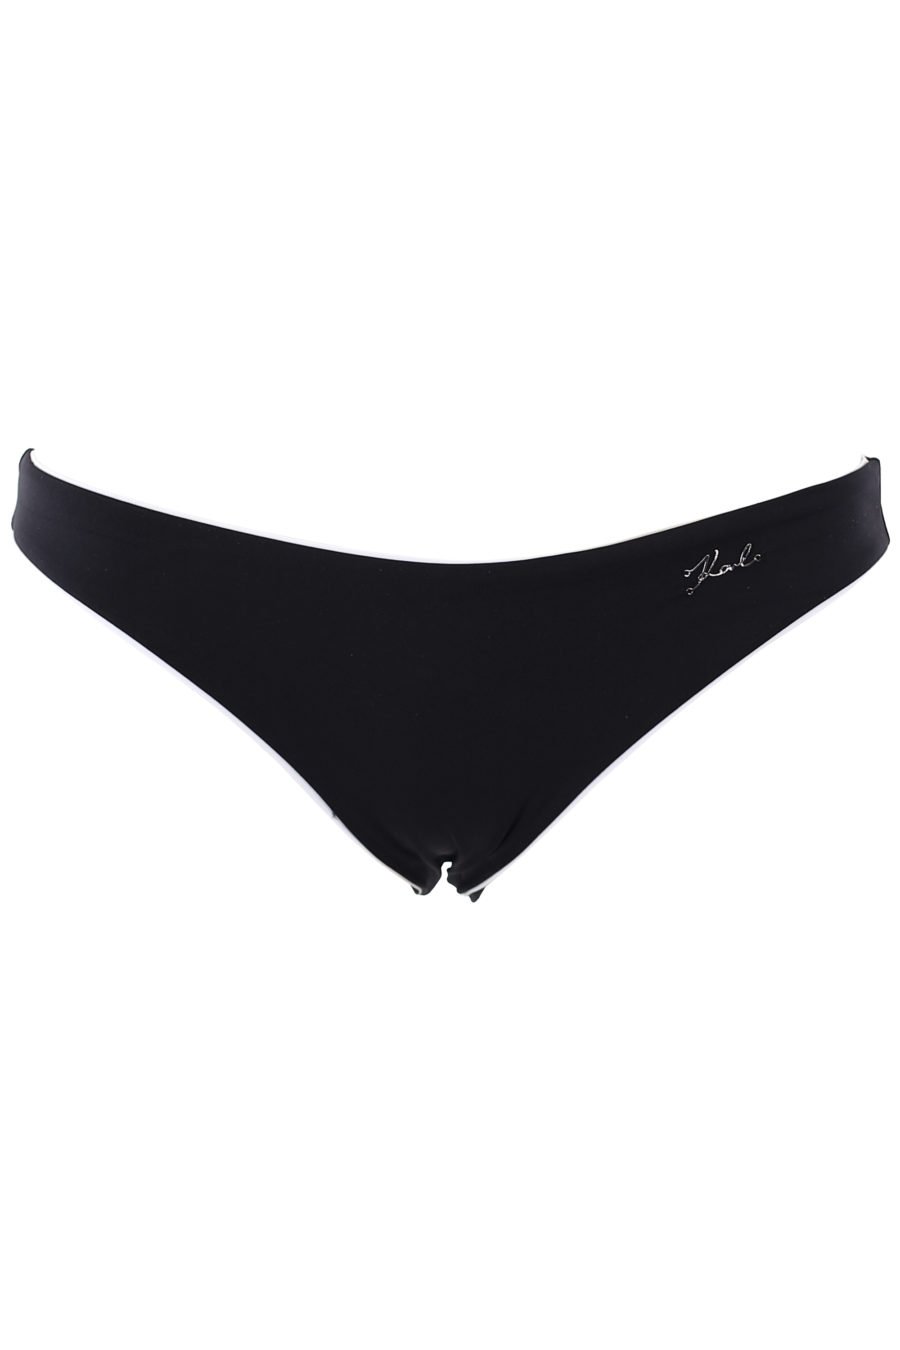 Two-tone black swimming costume with small metal lettering logo - IMG 1315